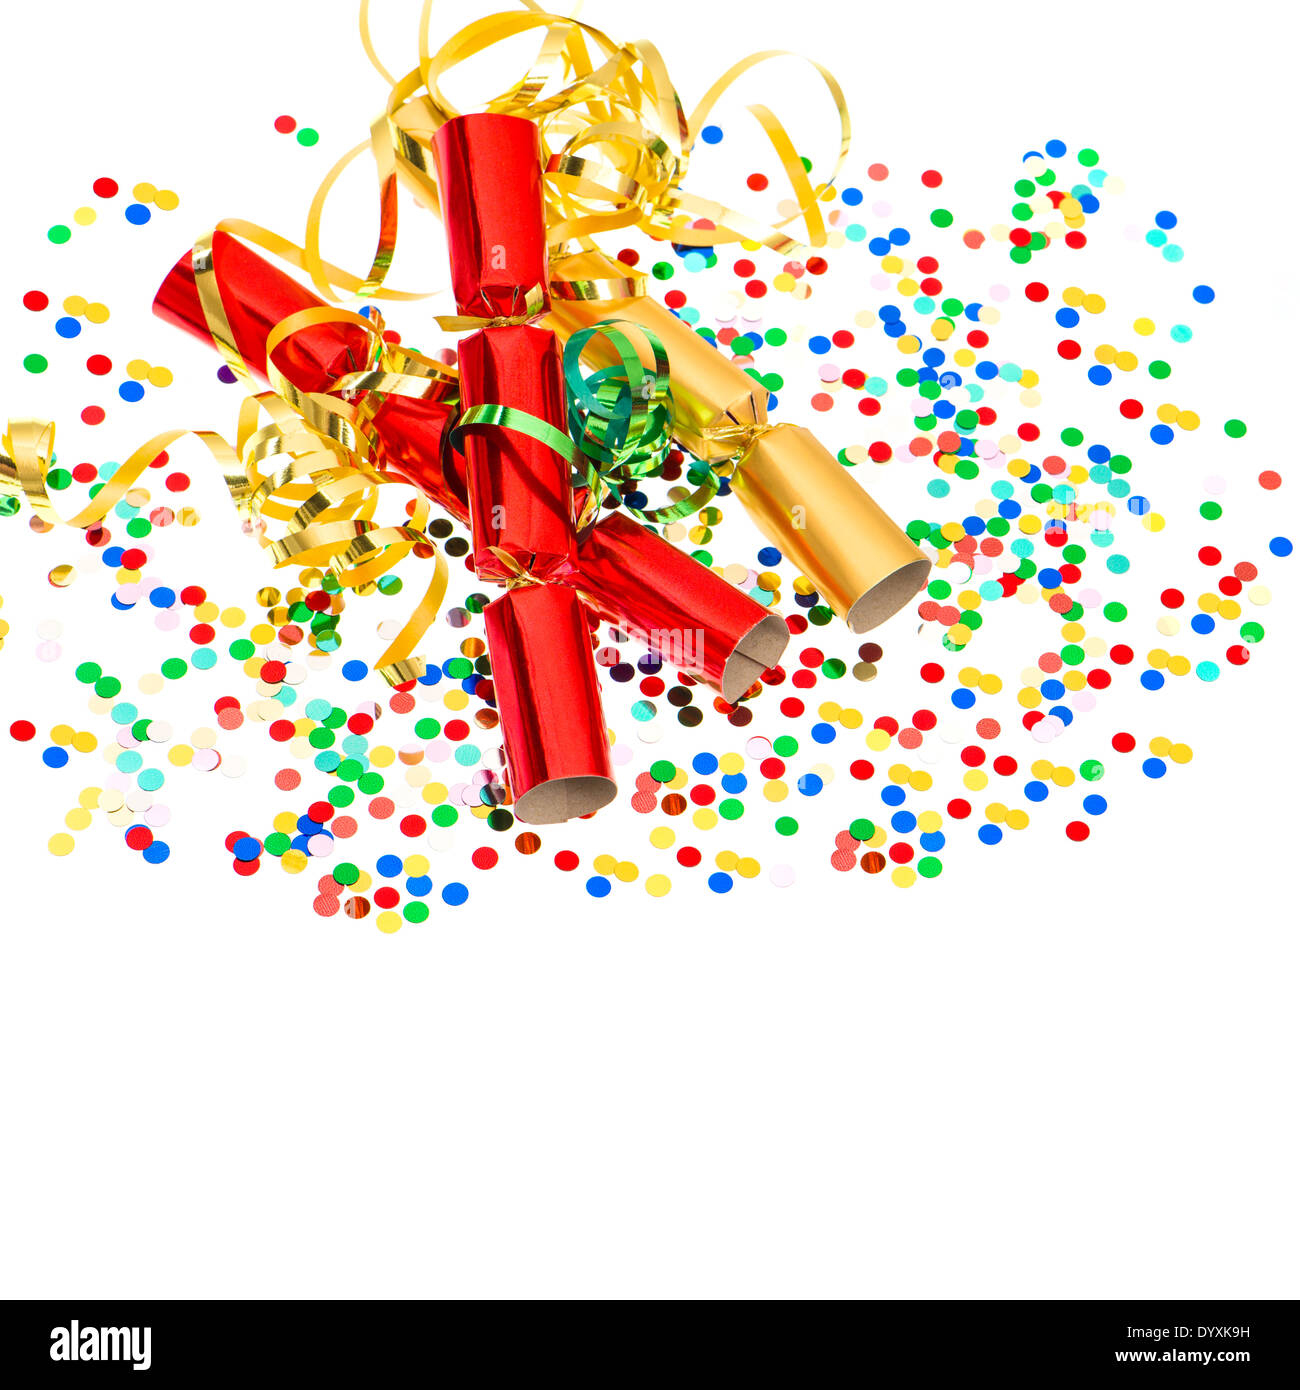 party cracker, golden streamer and confetti over white. festive decoration background Stock Photo